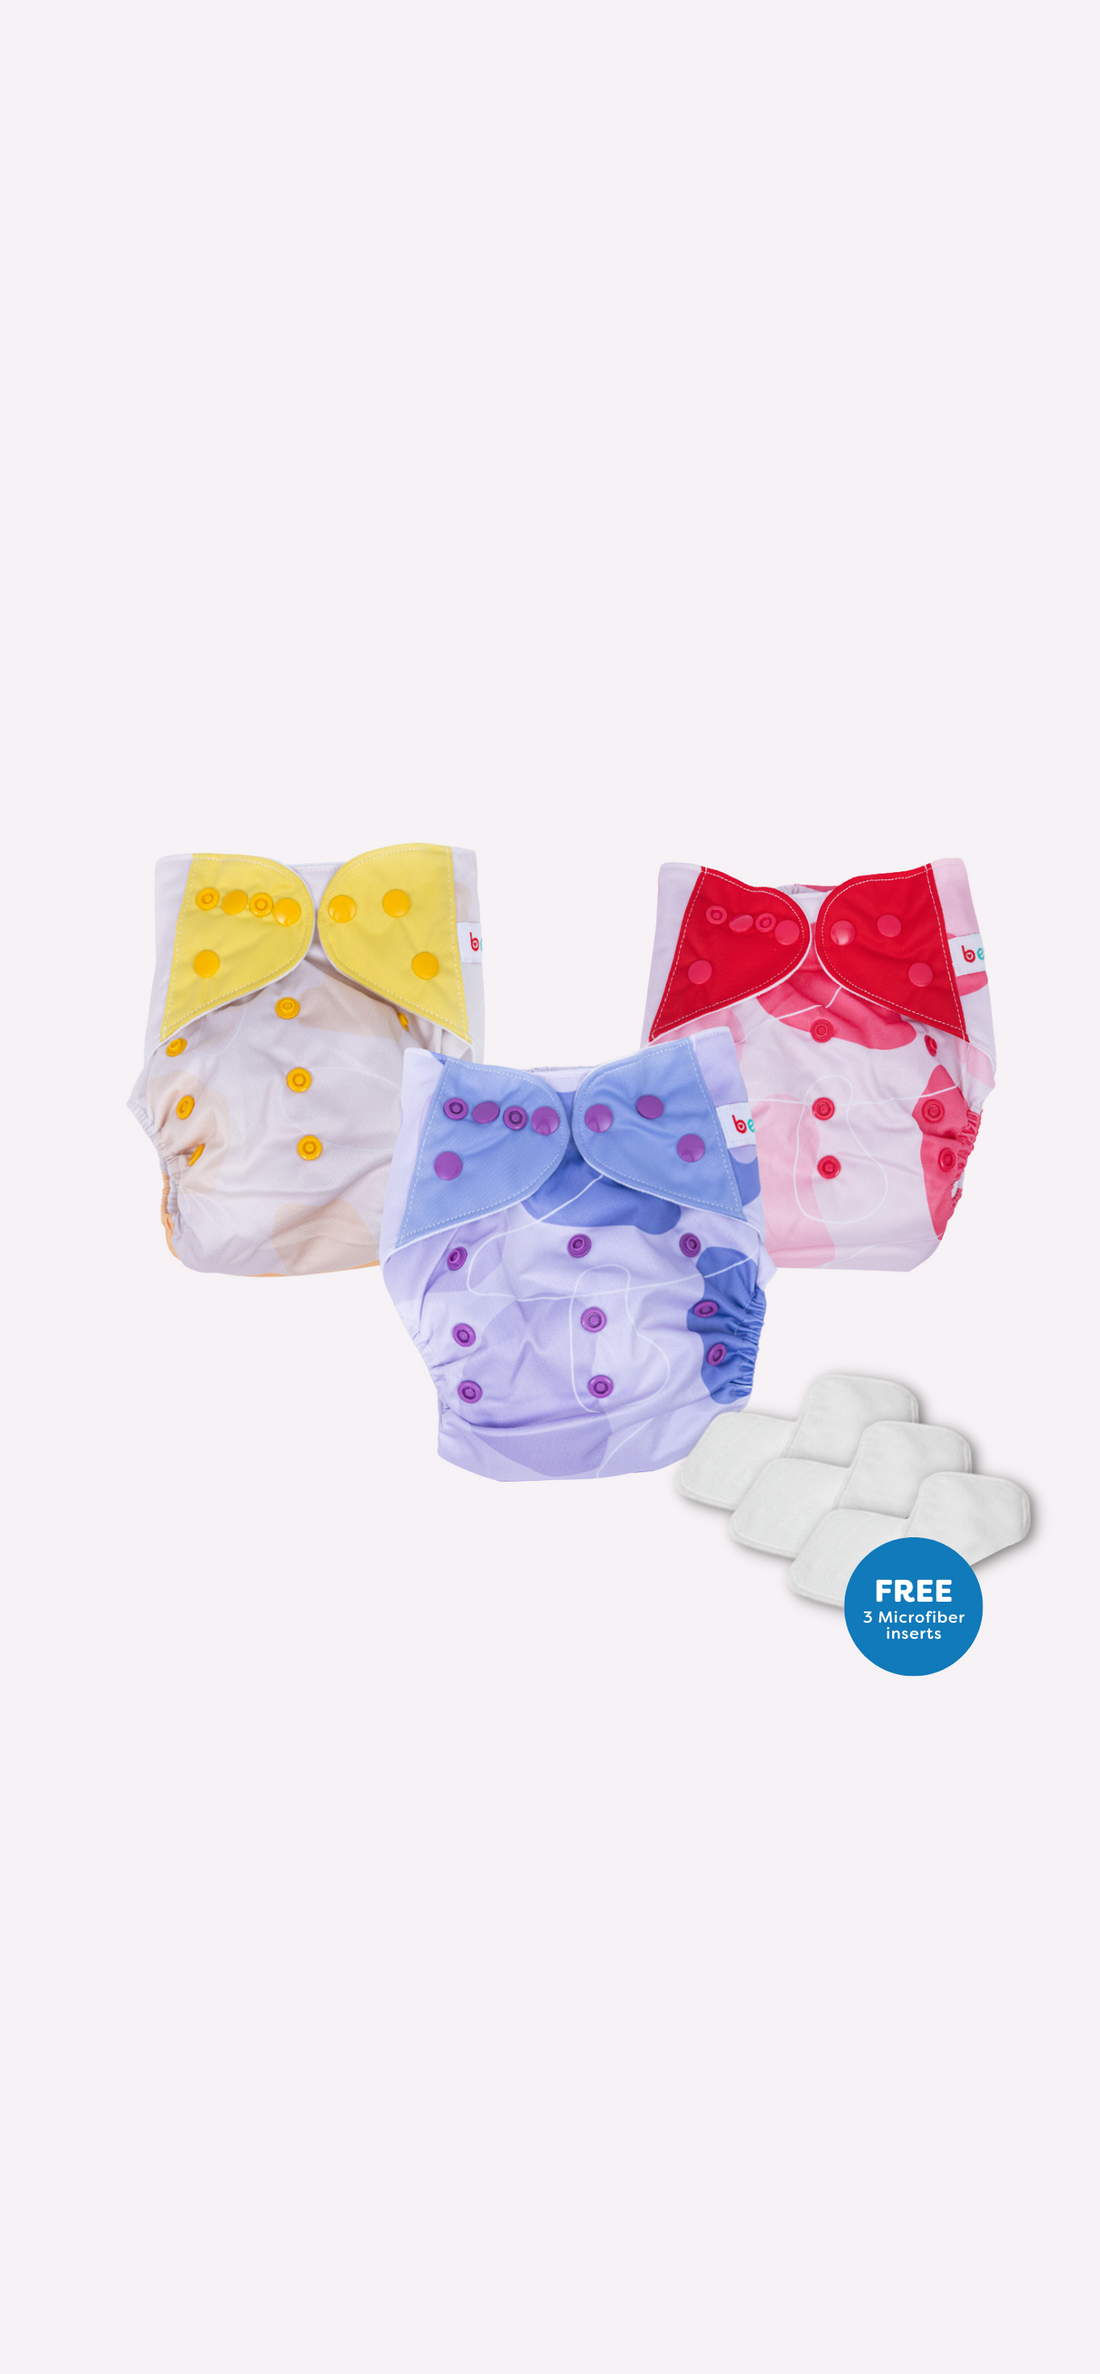 Snappies Little Beans Girly Cloth Diaper Set of 3